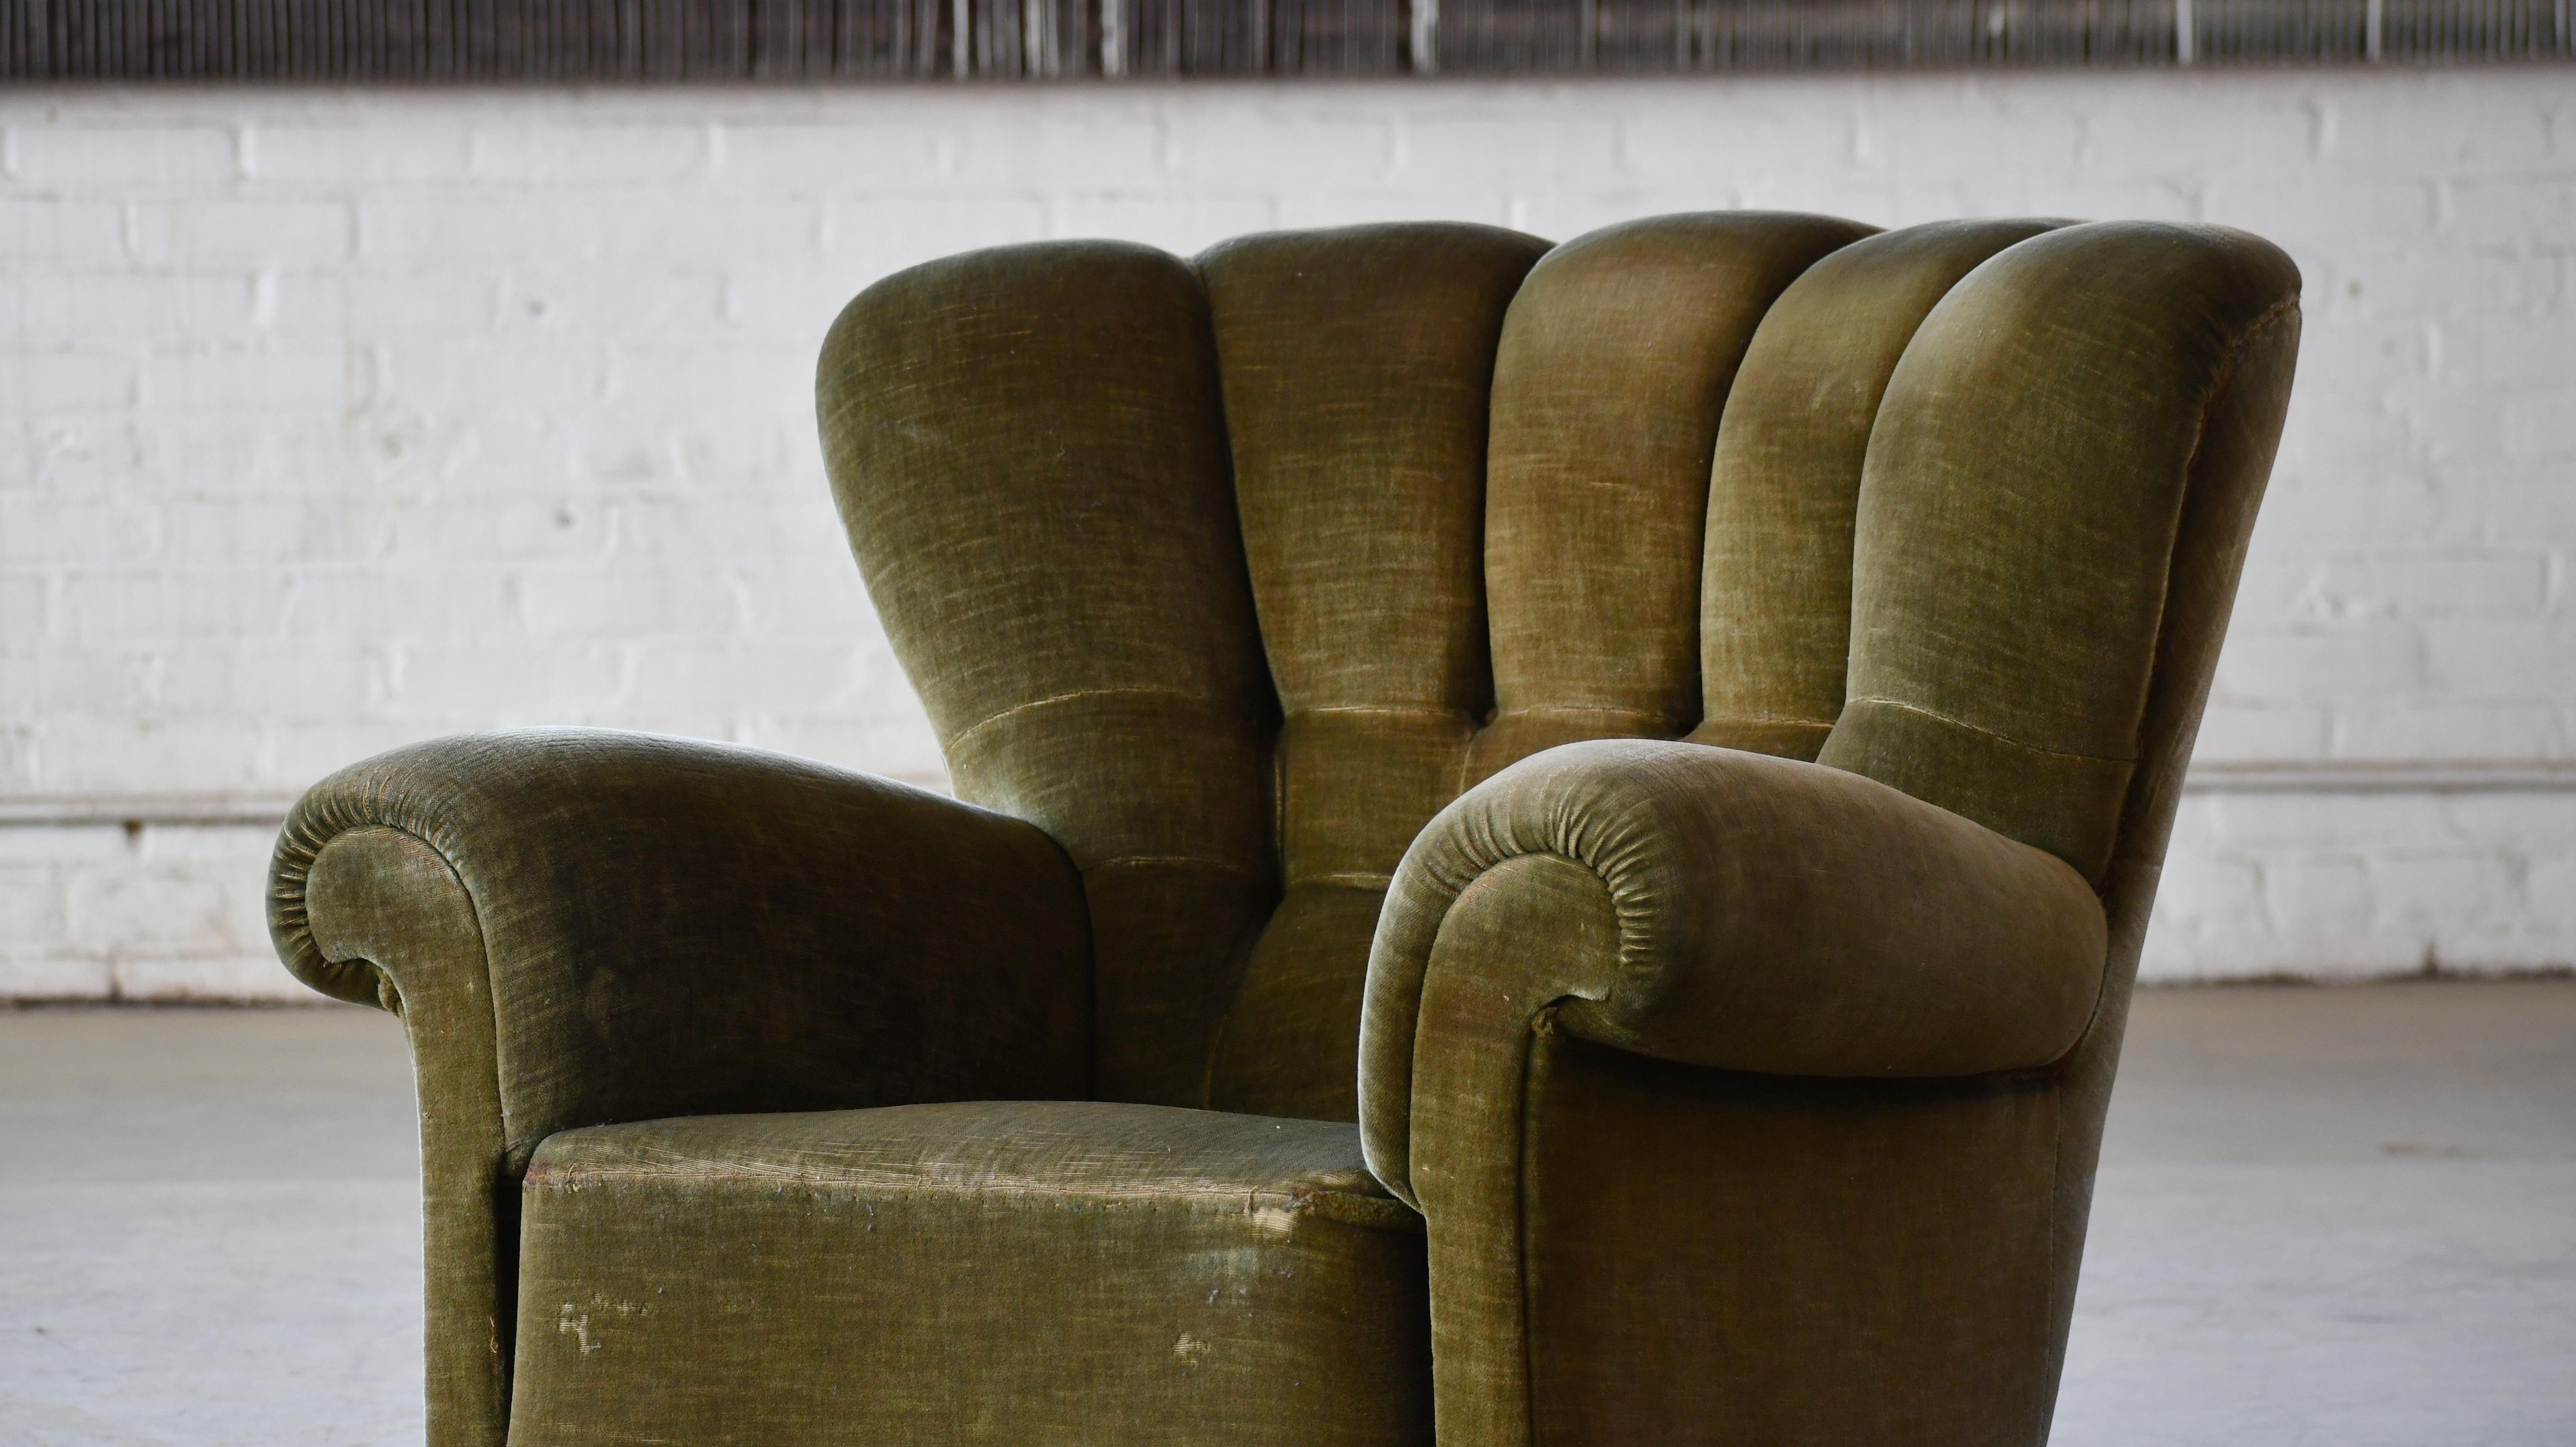 Danish Large Size Club Chair in Original mohair with Channeled Backrest, 1940's For Sale 4